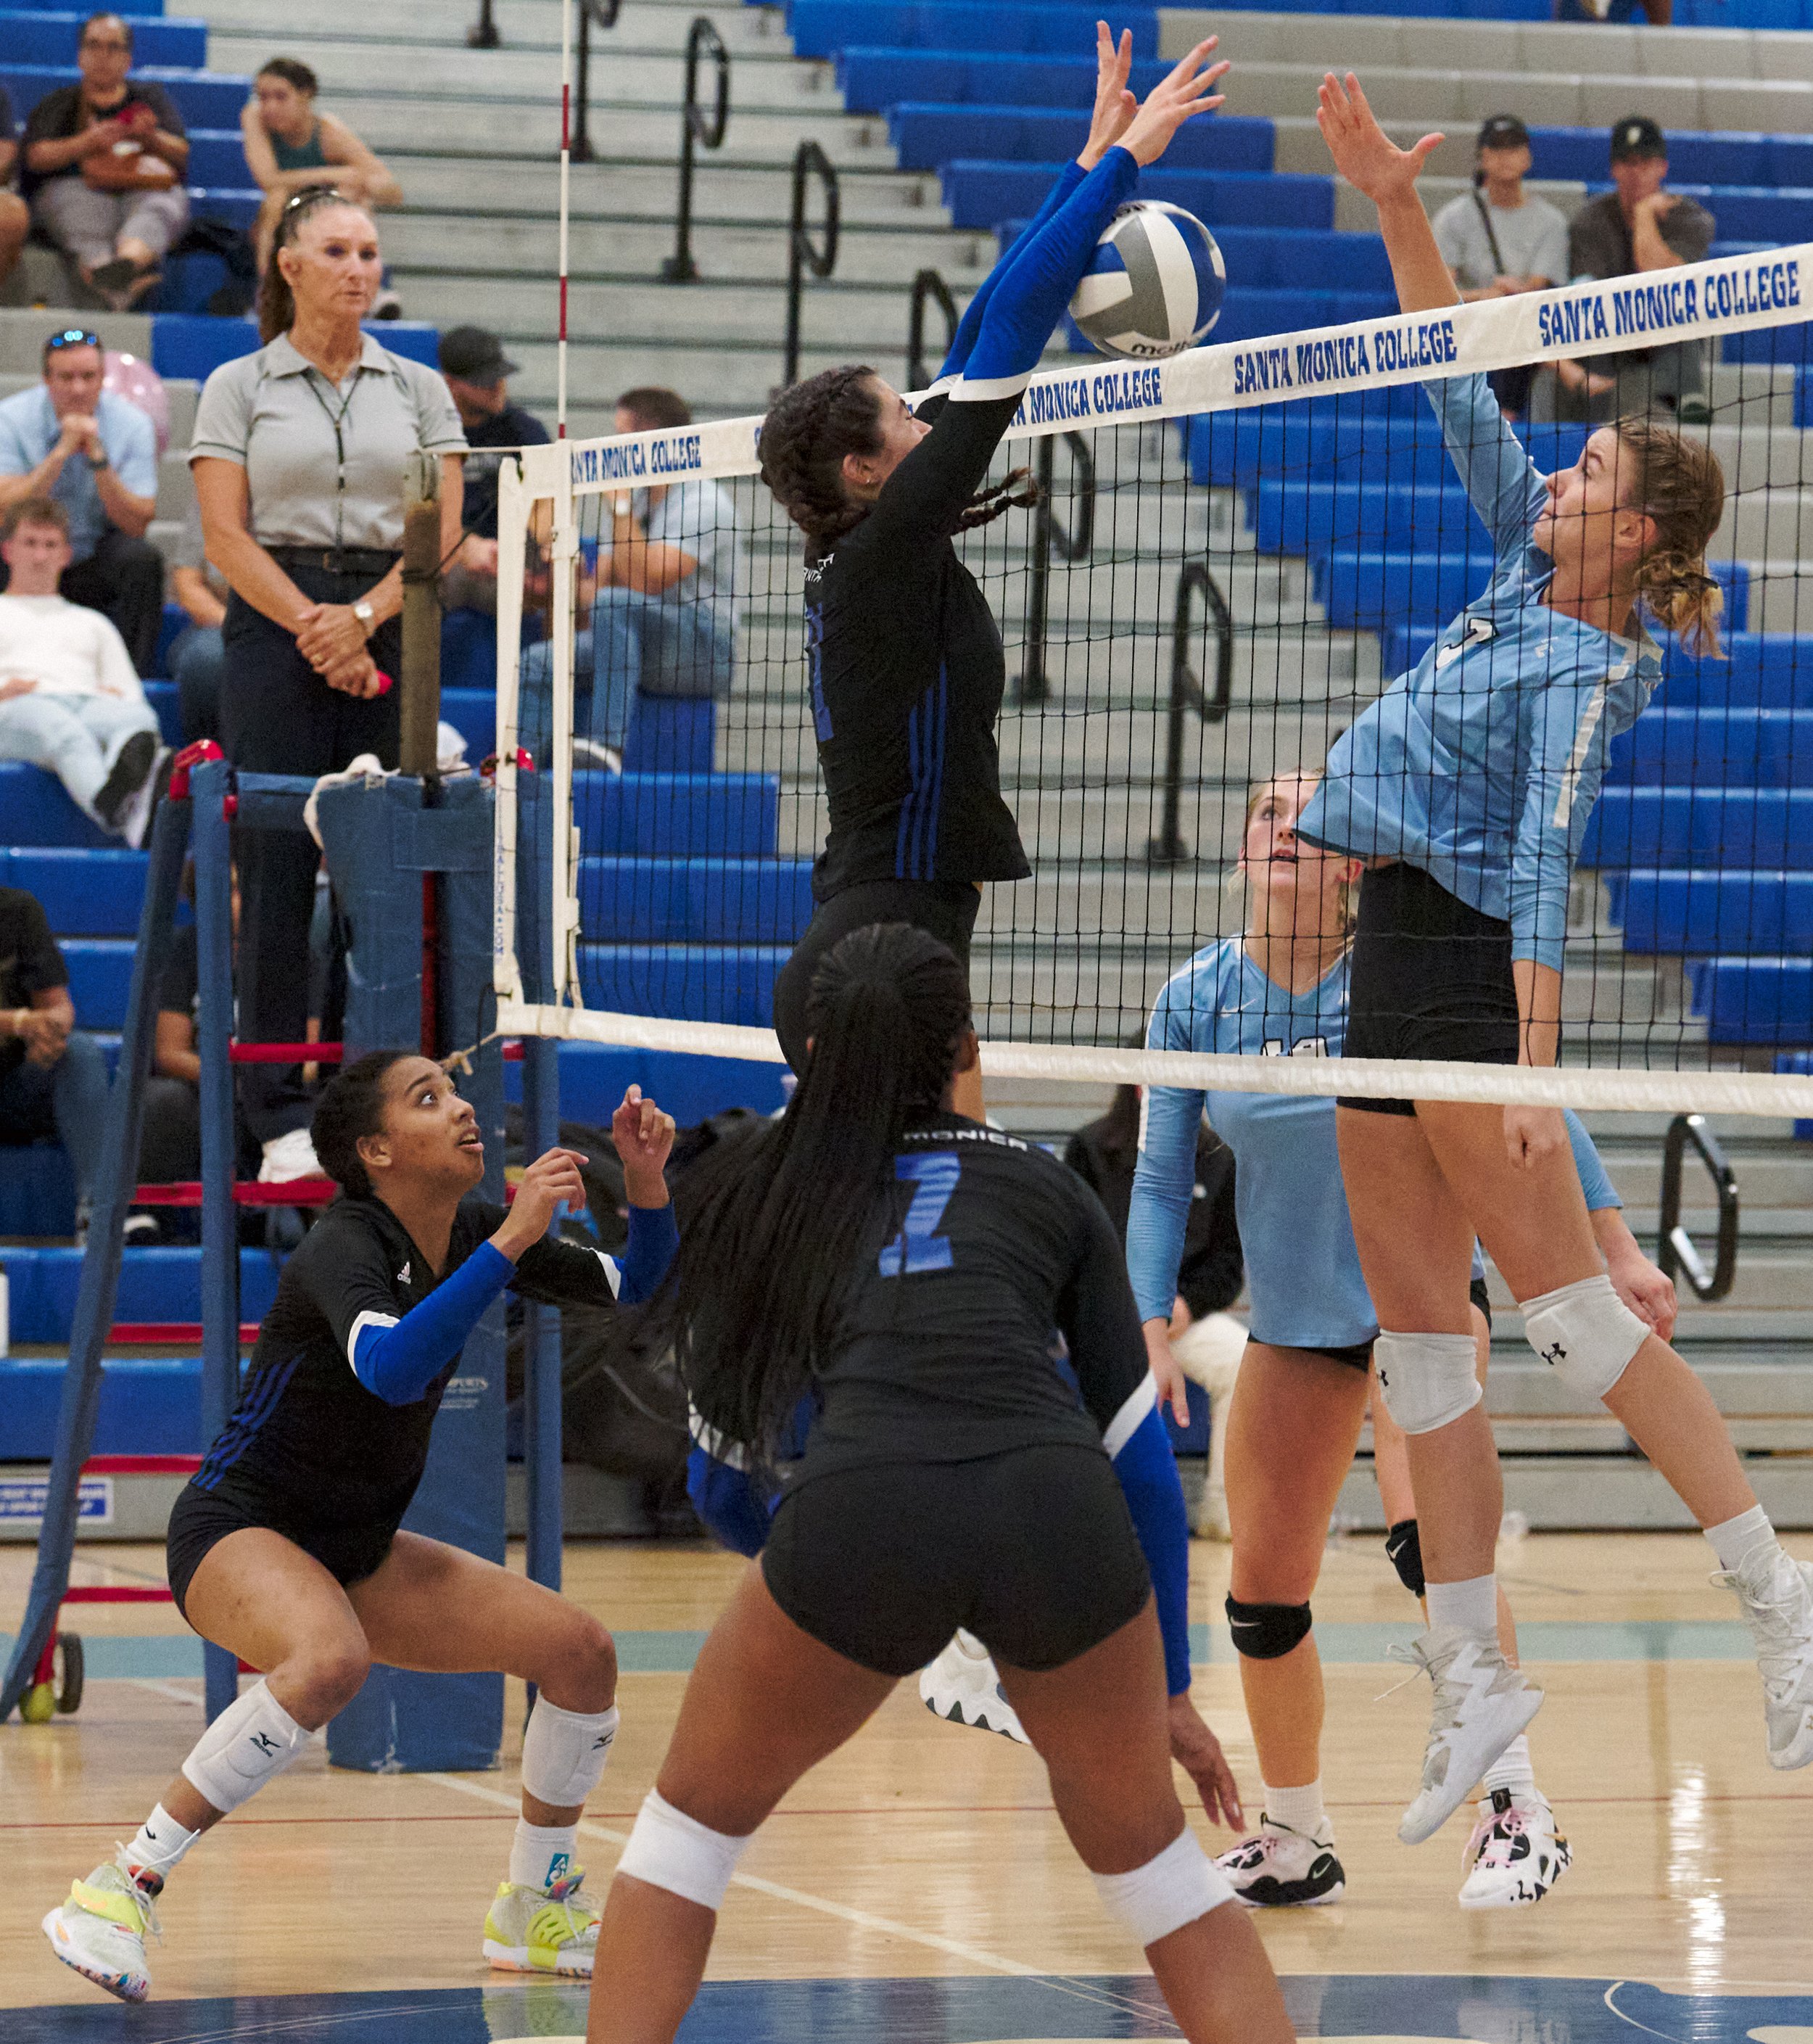  Santa Monica College Corsairs' Maiella Riva fails to block the attack by Ryann Gaglio from the Moorpark College Raiders during the women's volleyball game on Friday, Sept. 23, 2022, at the Corsair Gym in Santa Monica, Calif. The Corsairs won 3-2. (N